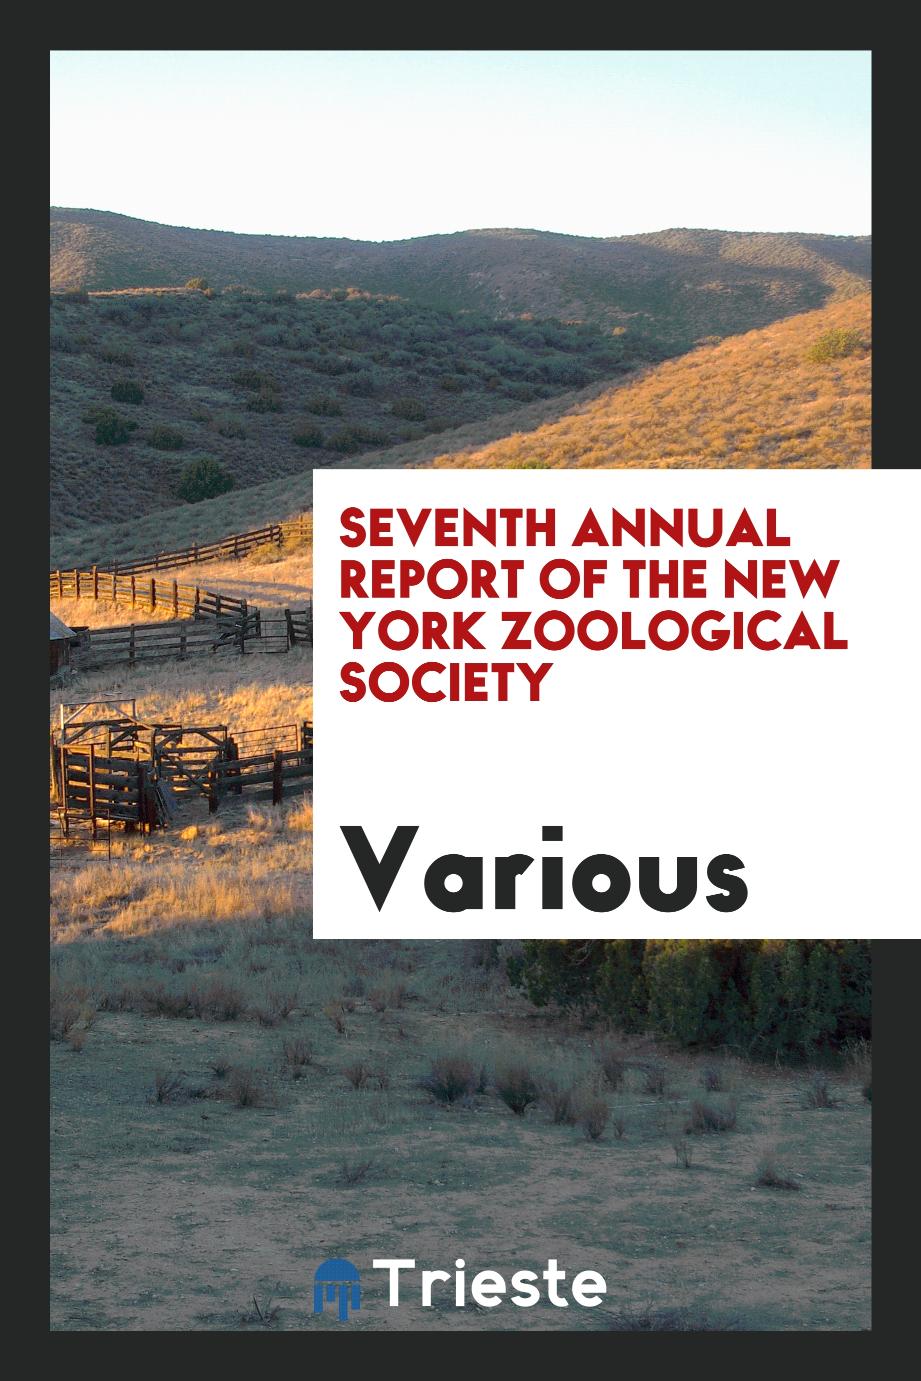 Seventh Annual report of the New York Zoological Society